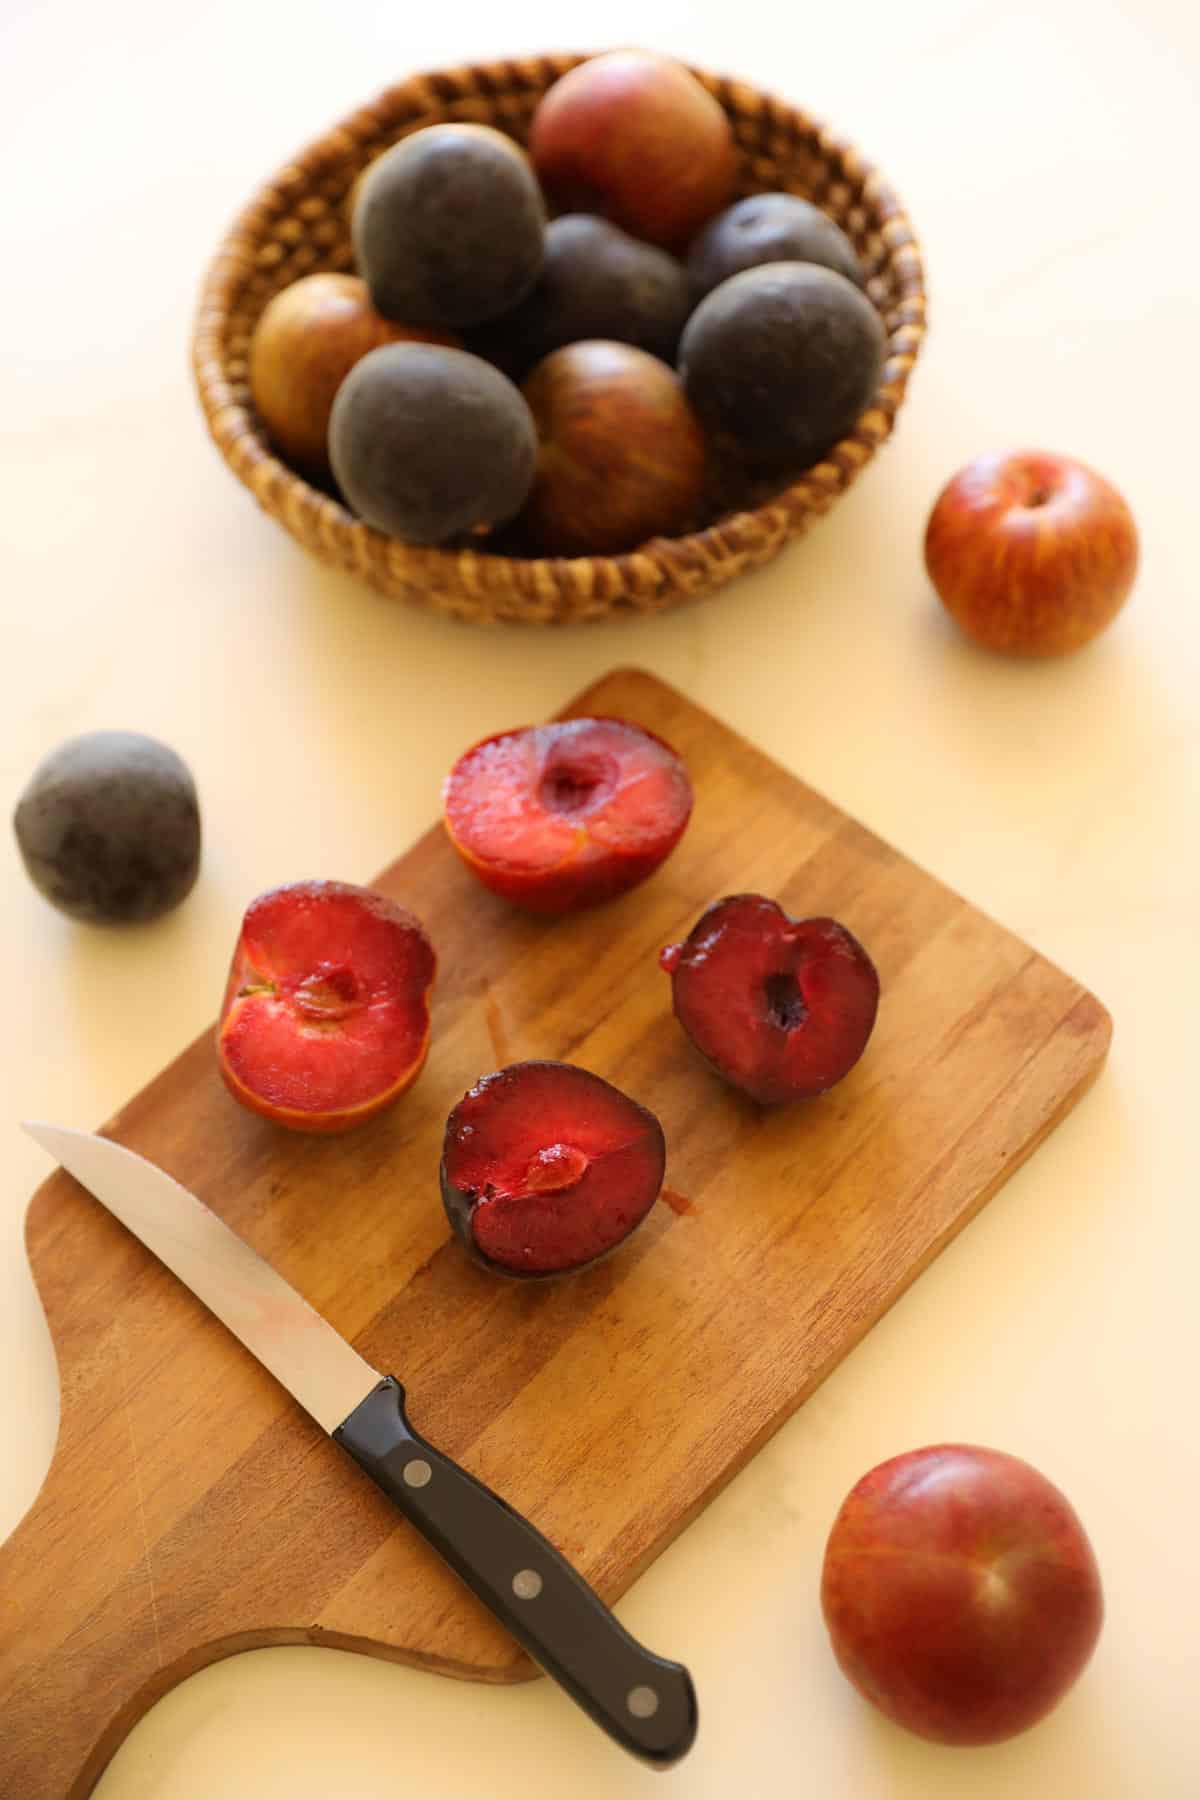 Red plums on a cutting board being sliced